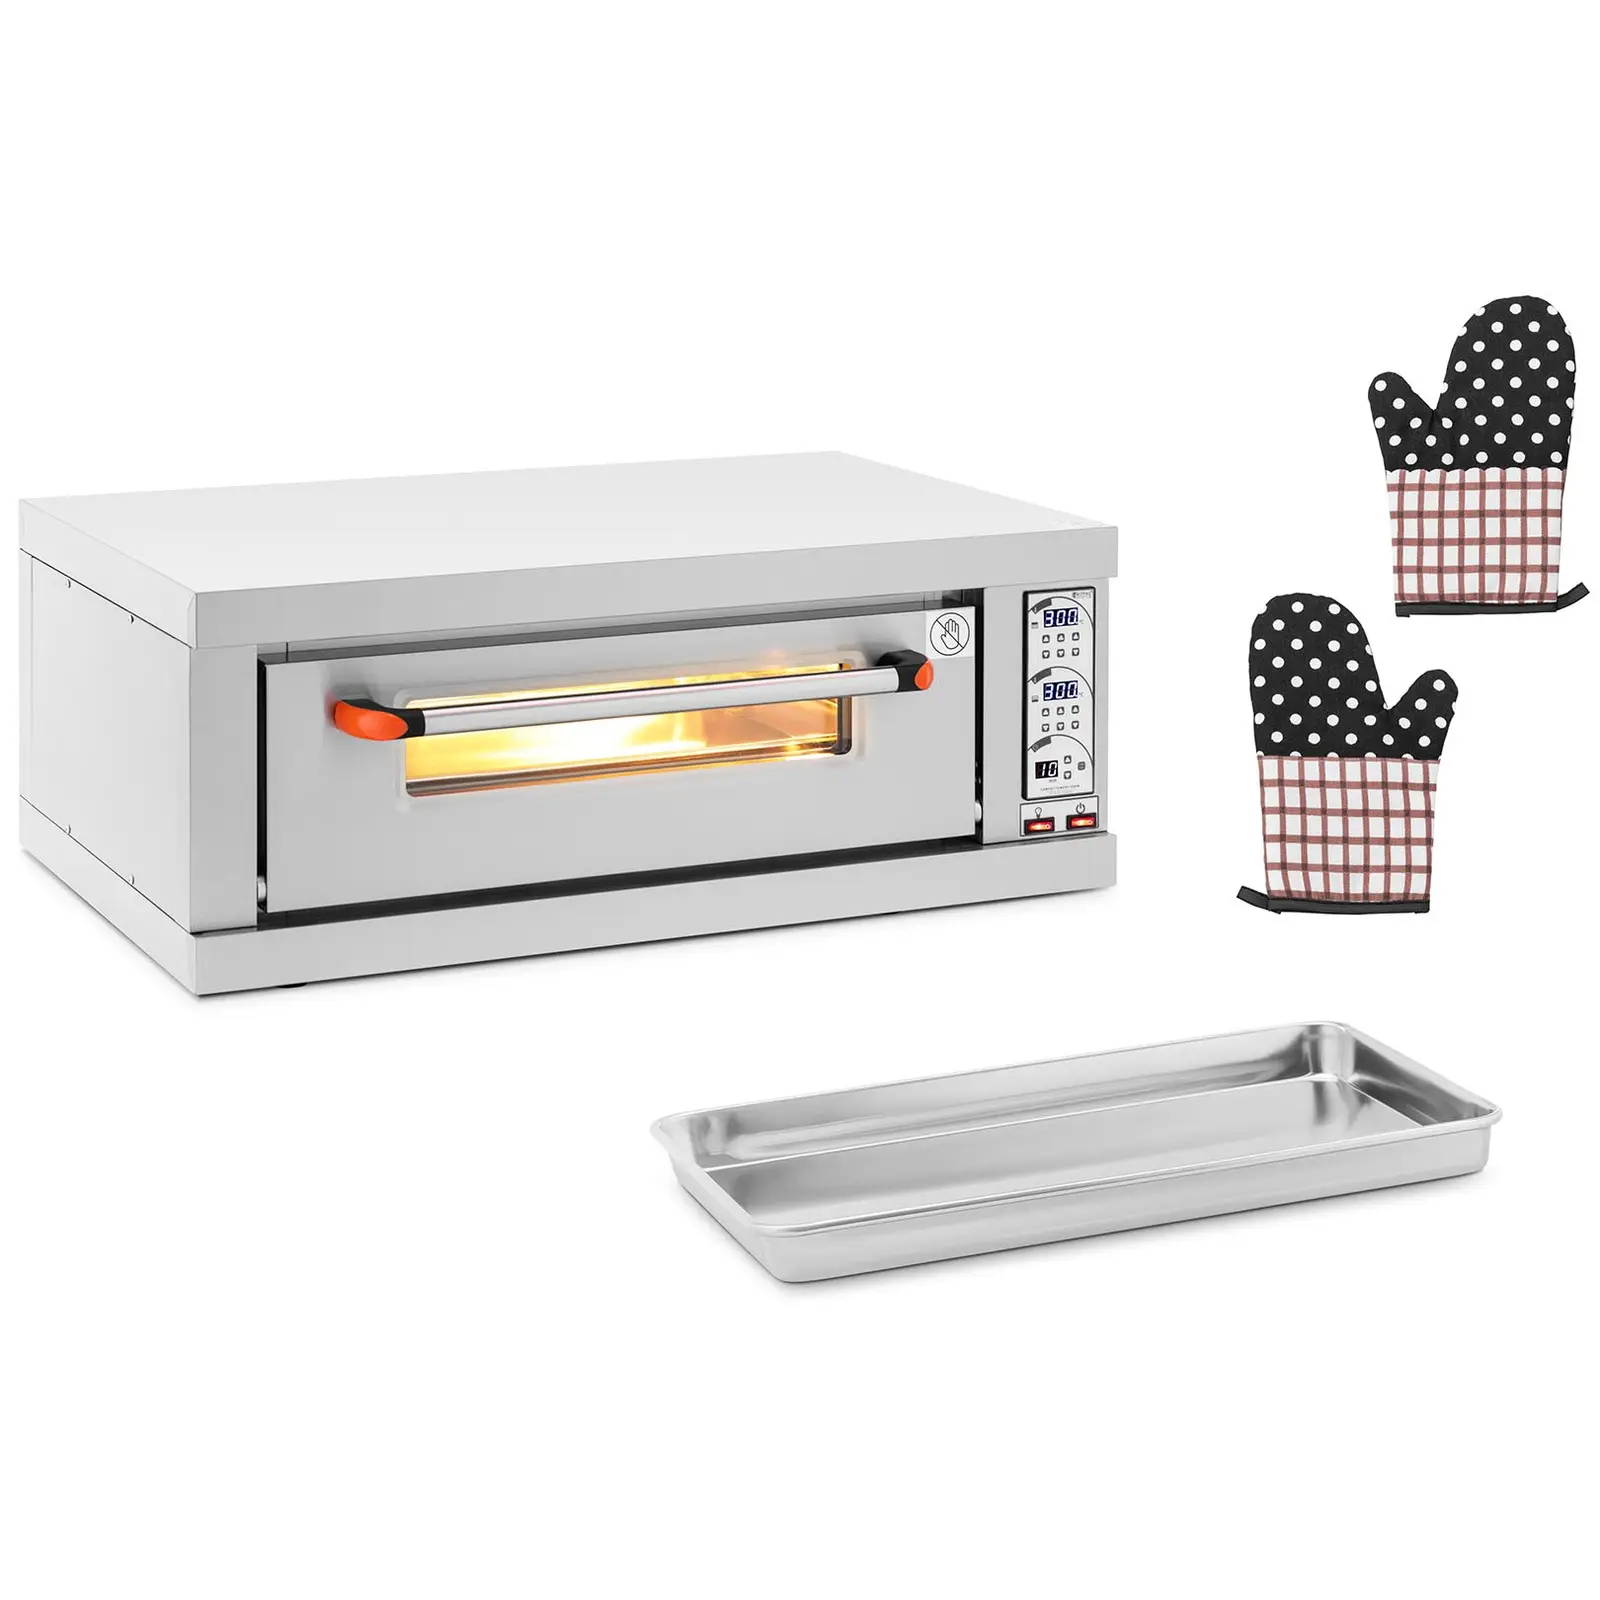 B-Ware Pizzaofen - 1 Kammer - 3200 W - Timer - Royal Catering